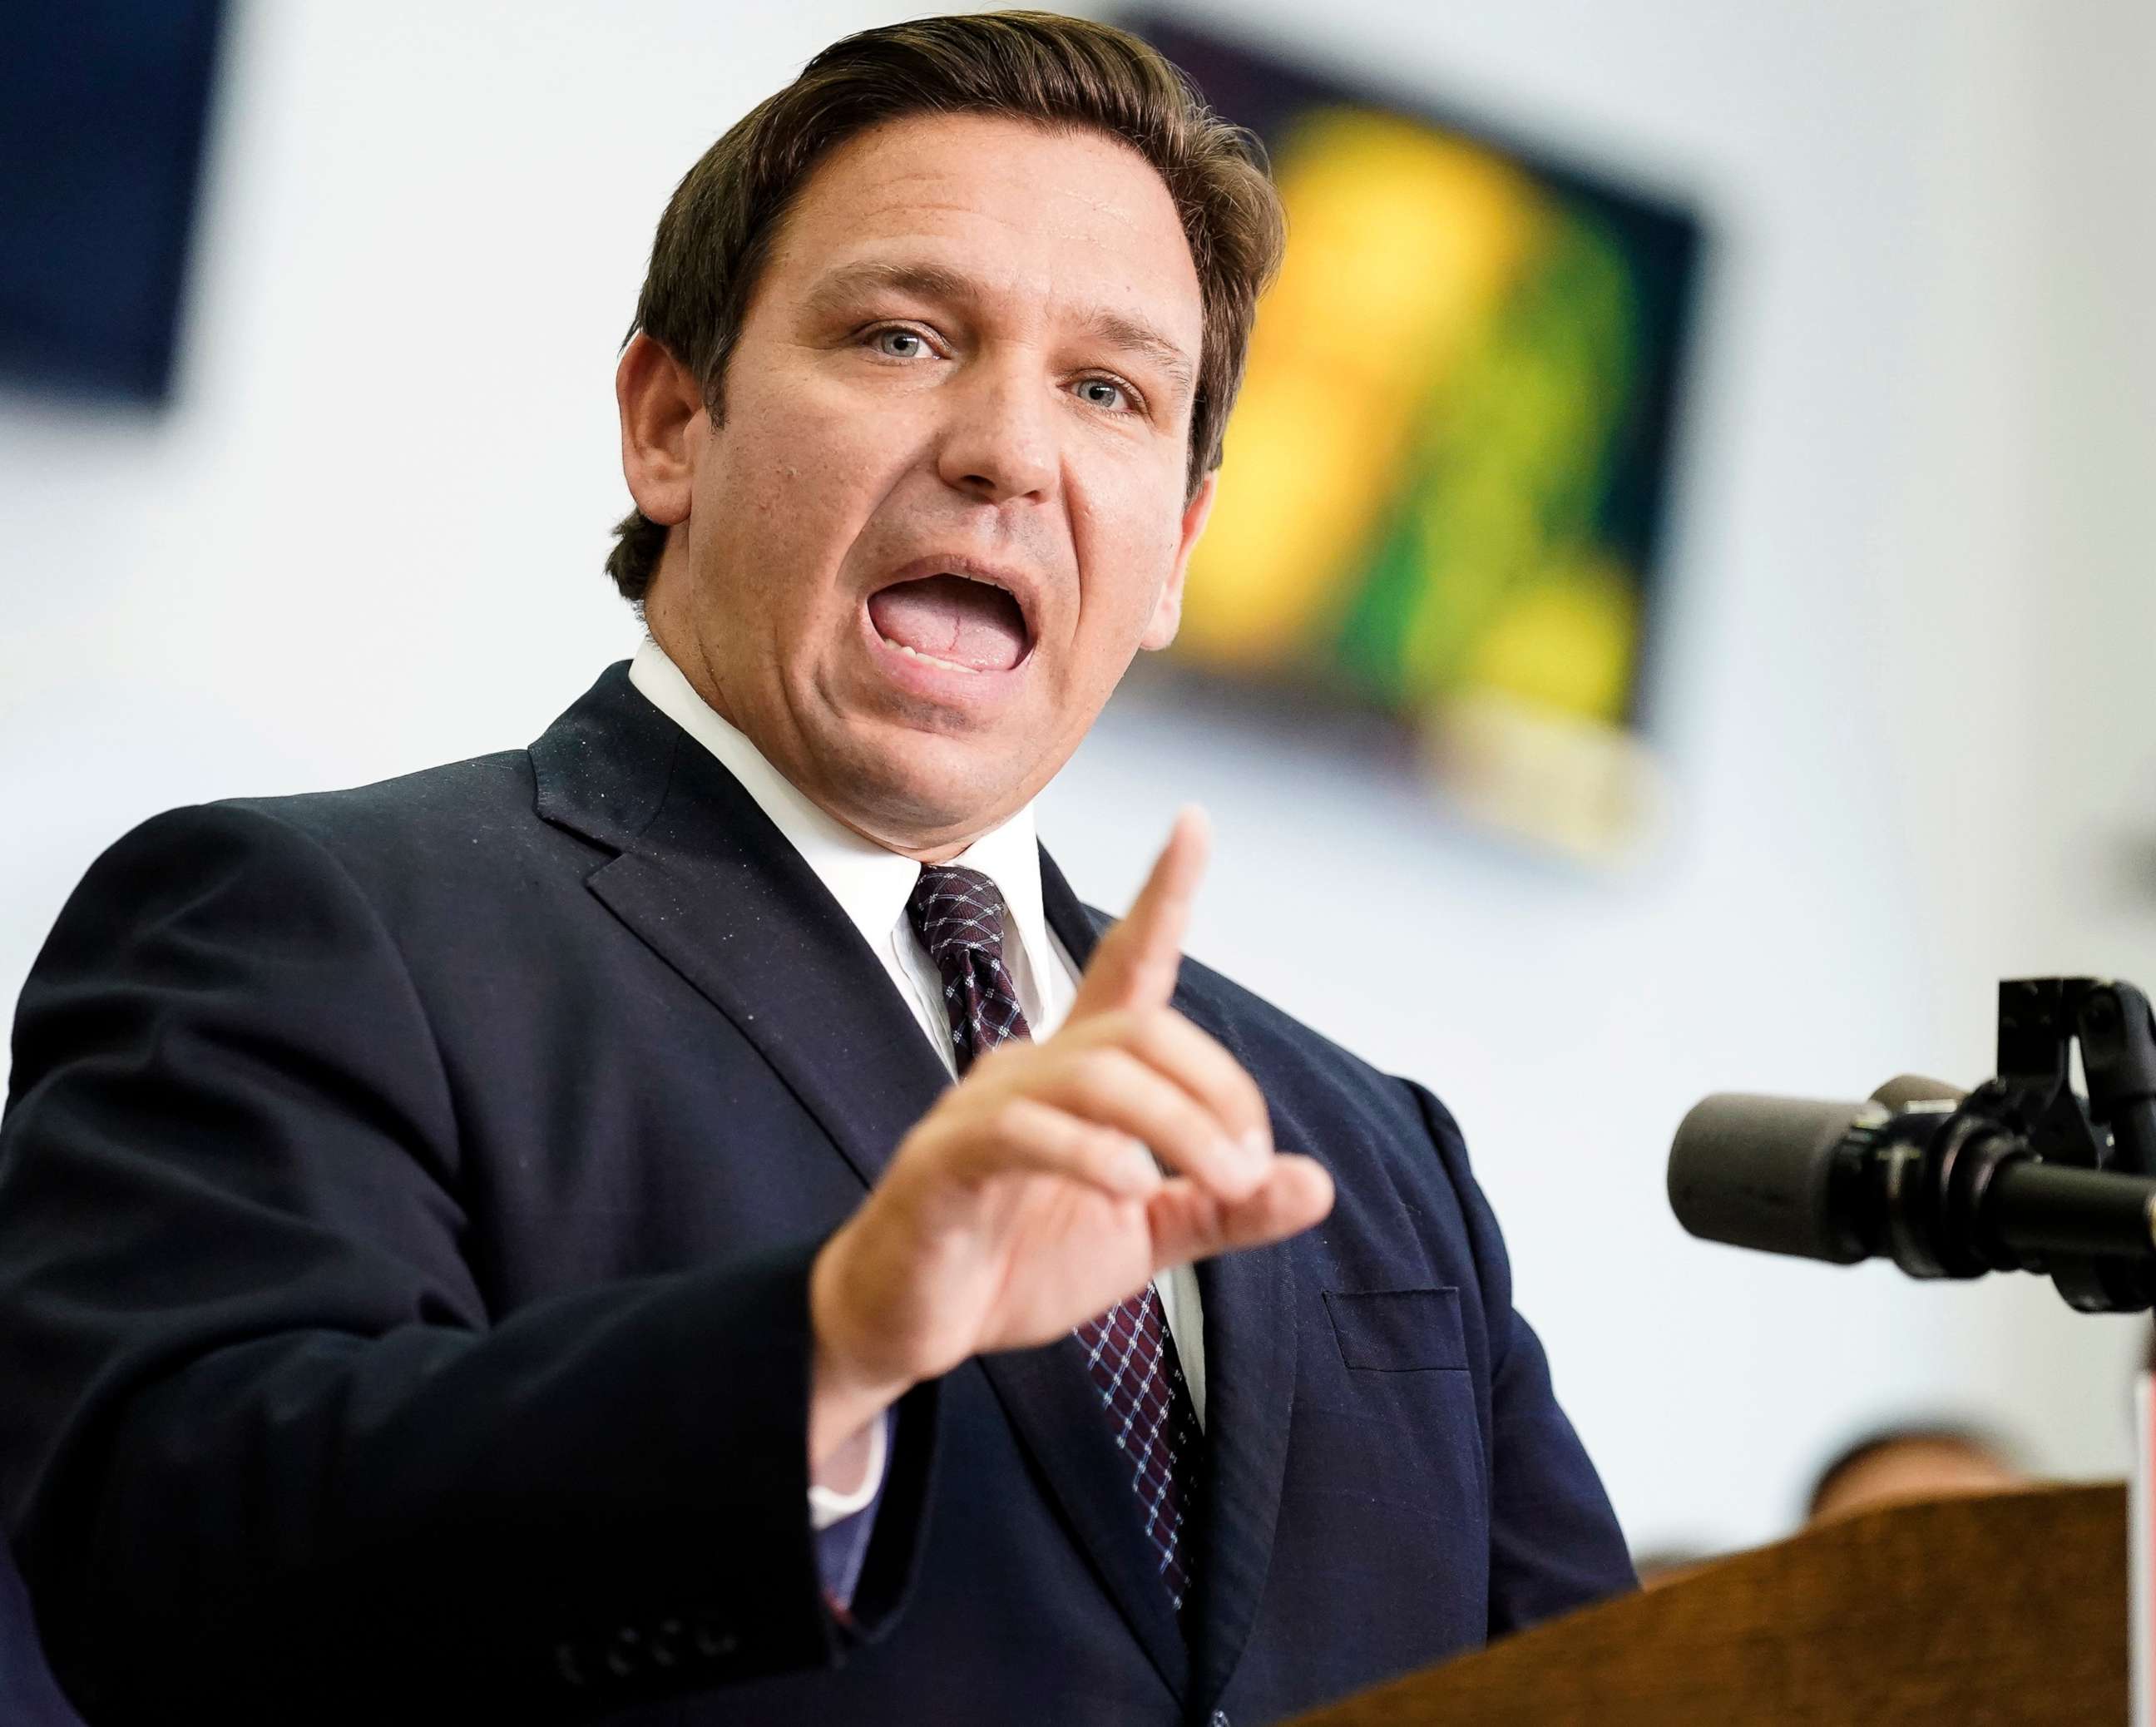 PHOTO: In this Nov. 18, 2021 file photo Florida Gov. Ron DeSantis speaks to supporters and members of the media after a bill signing in Brandon, Fla.